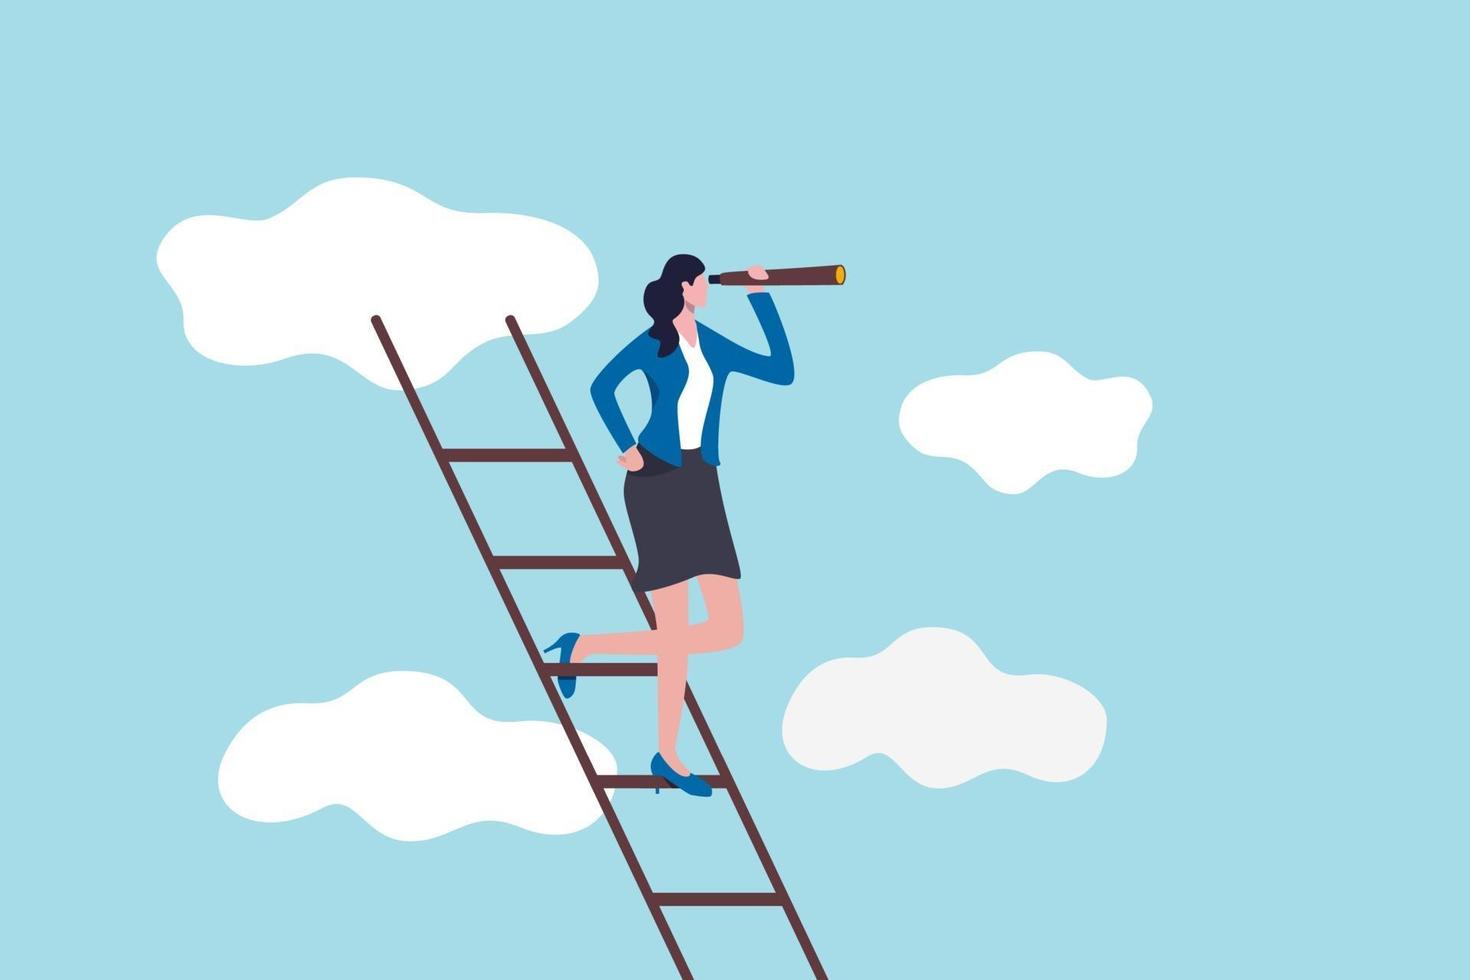 Woman leadership, new diversity world directed by lady leader concept, confidence executive businesswoman company or country leader standing on ladder of success using telescope for future vision. vector